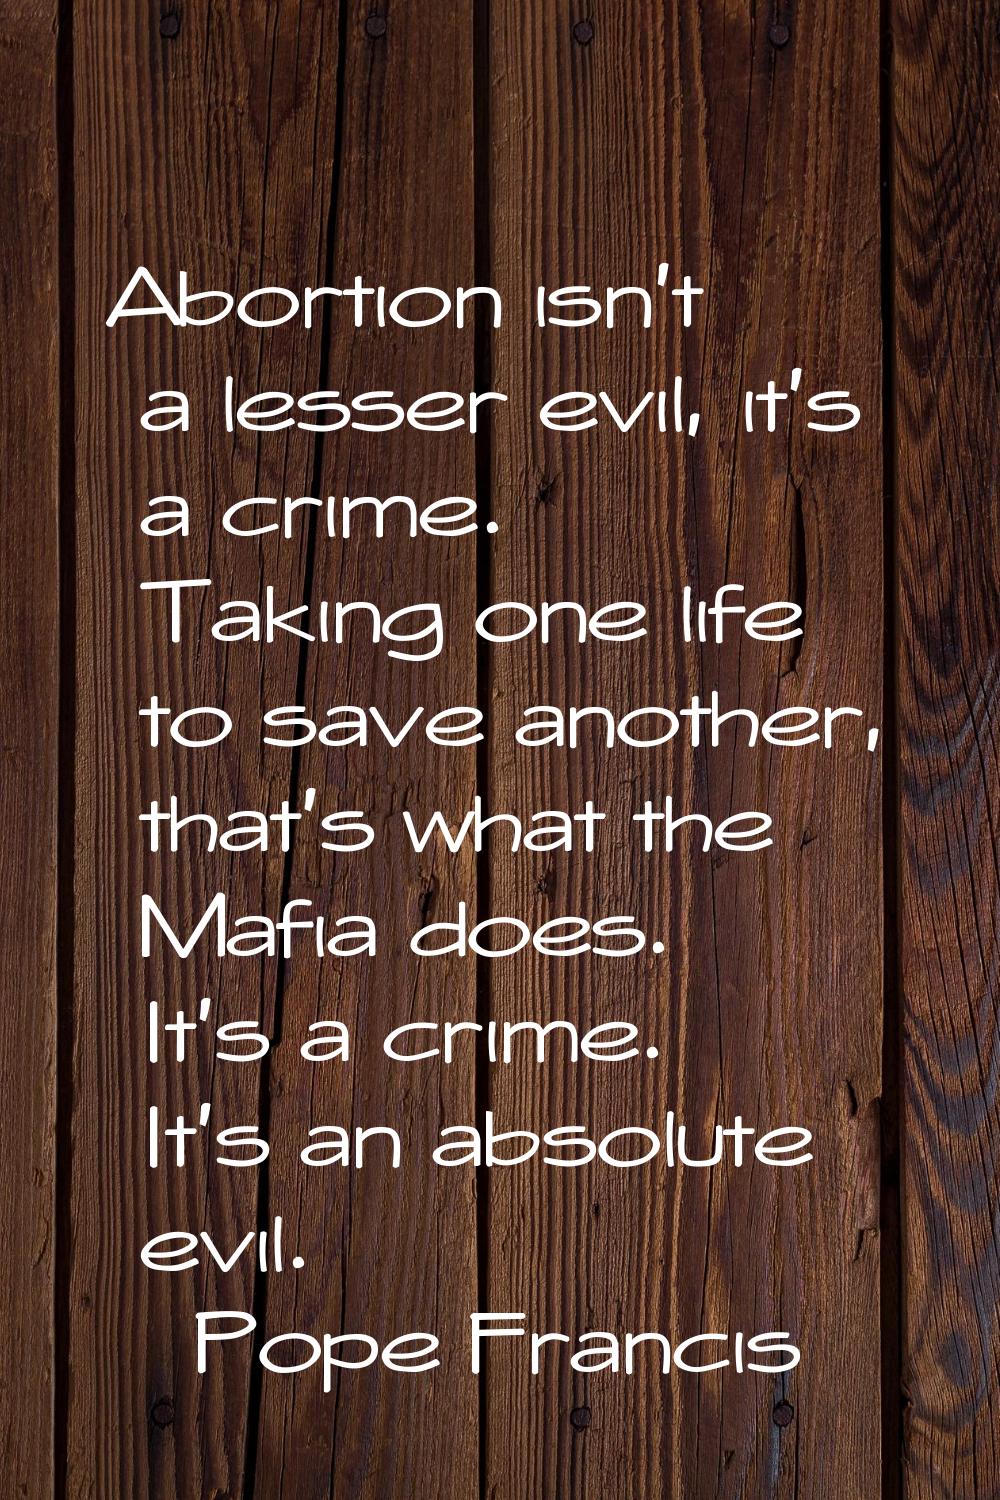 Abortion isn't a lesser evil, it's a crime. Taking one life to save another, that's what the Mafia 